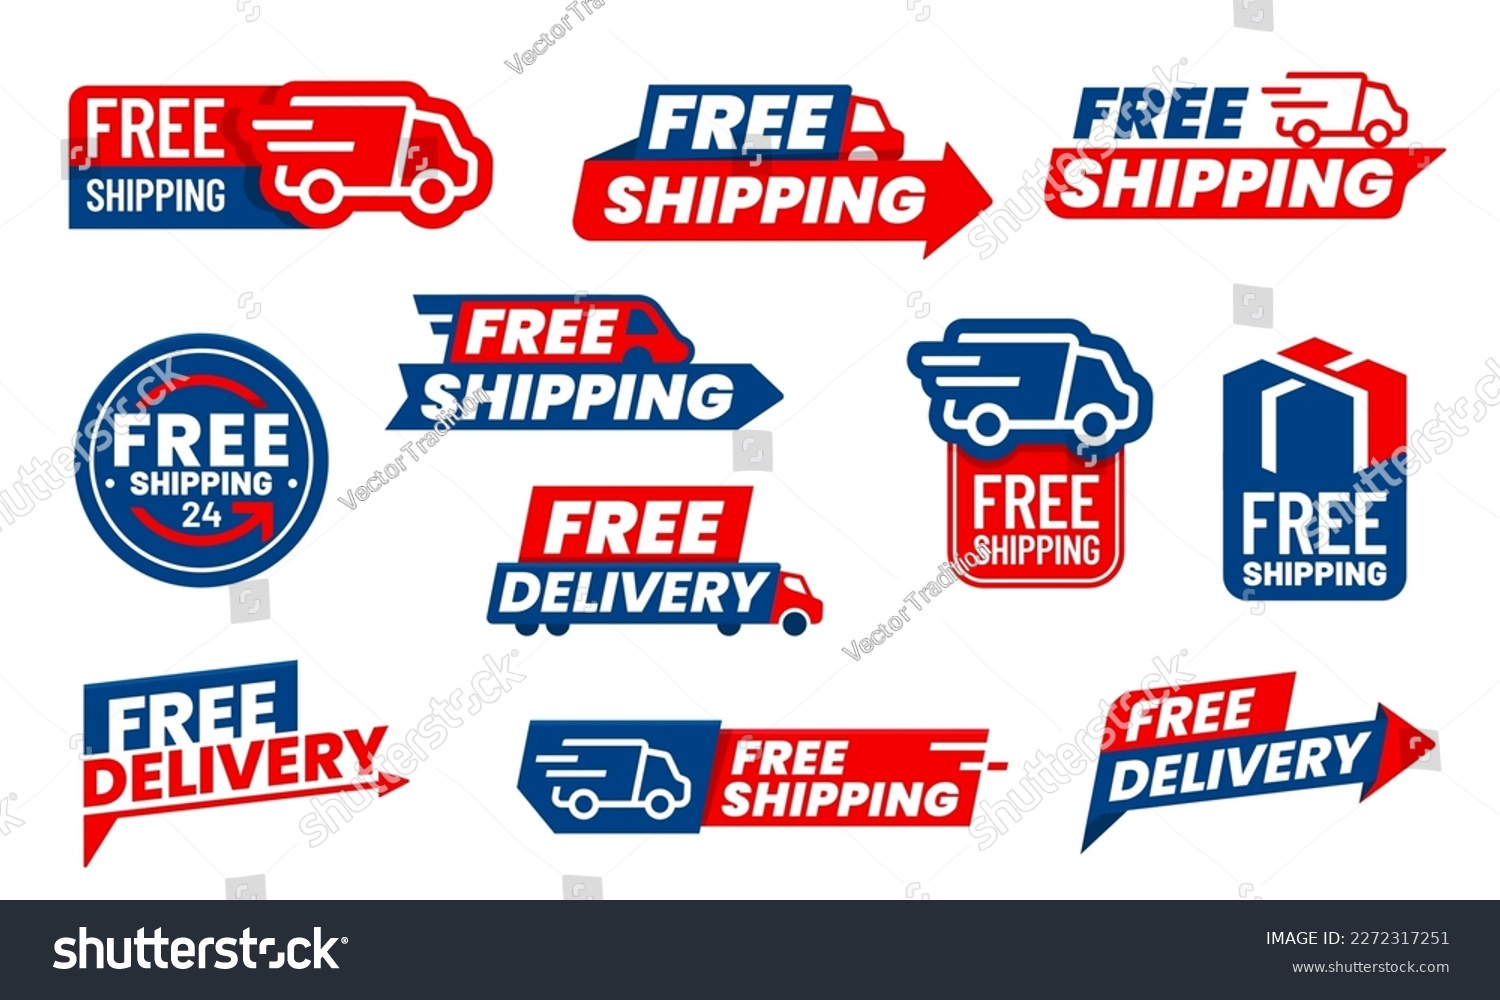 Free delivery icons, truck and arrow for shipping or courier service vector 24 hours express order symbols. Free delivery stickers with van car and parcel box or mail package for express shipping #2272317251